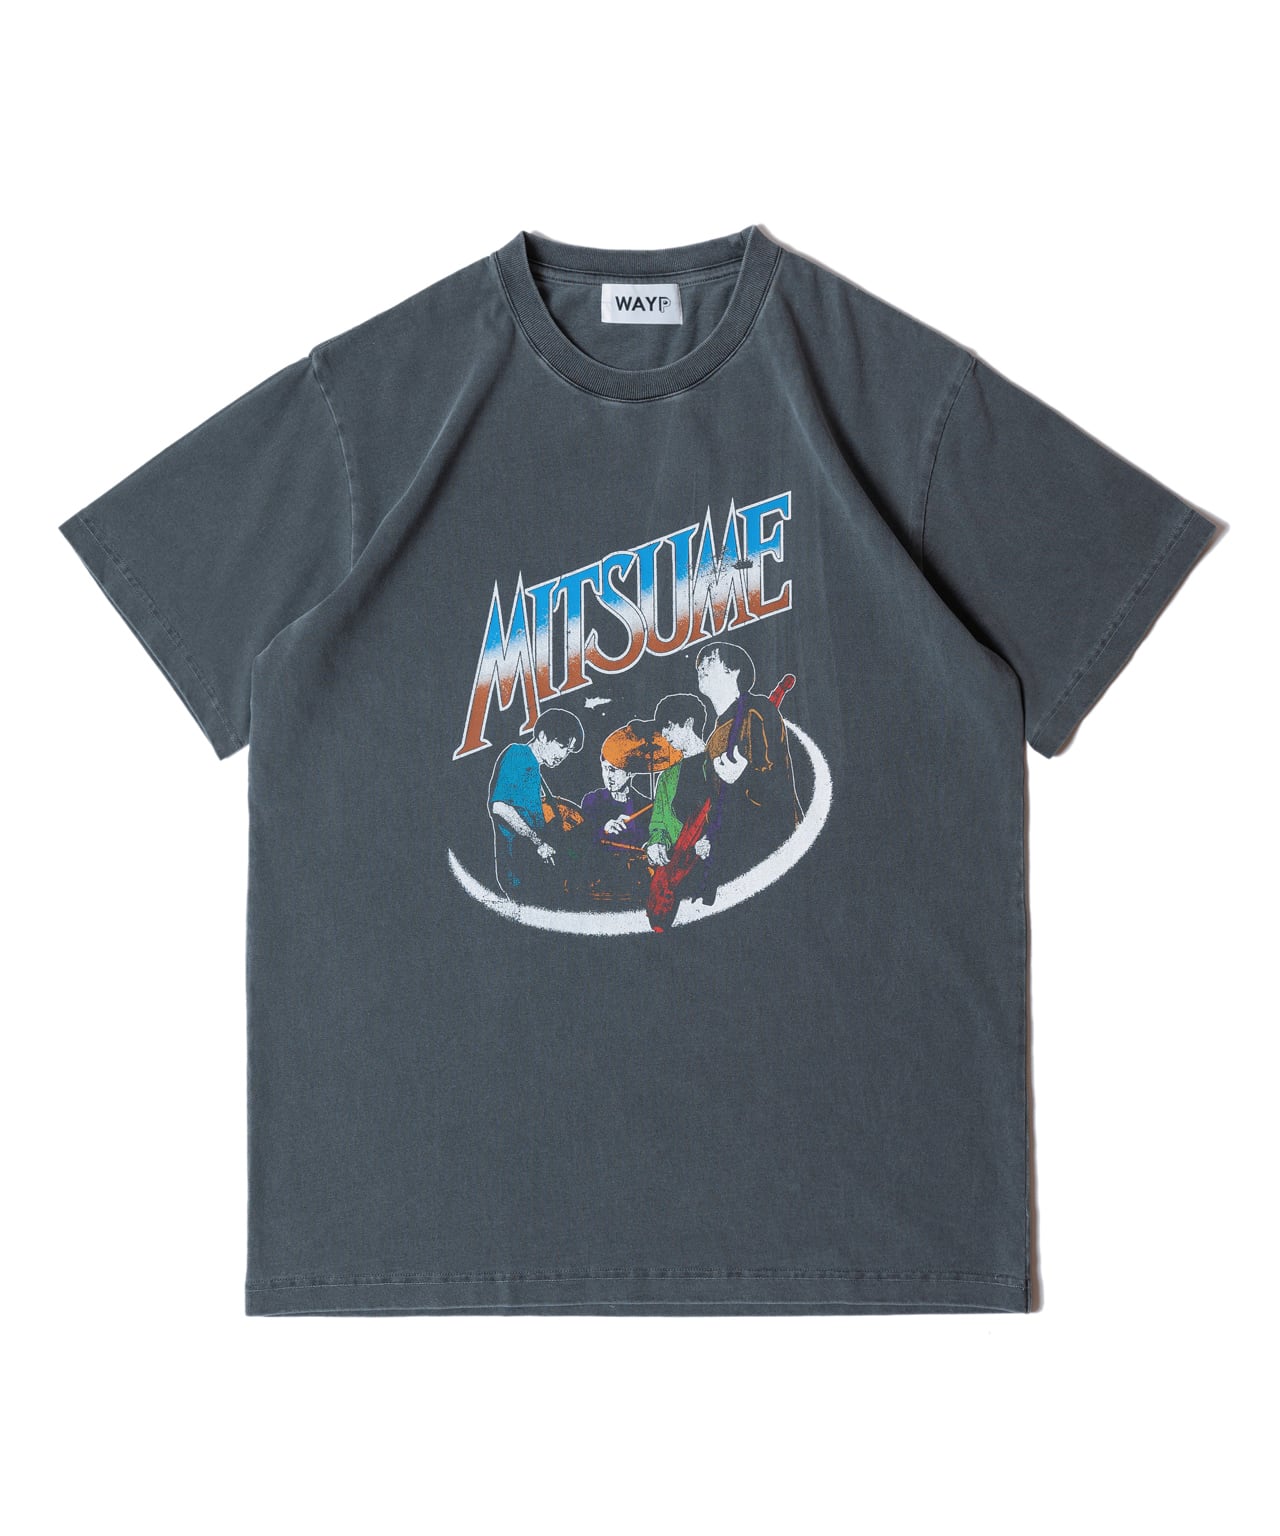 mitsume Tee by WAYP MUSIC